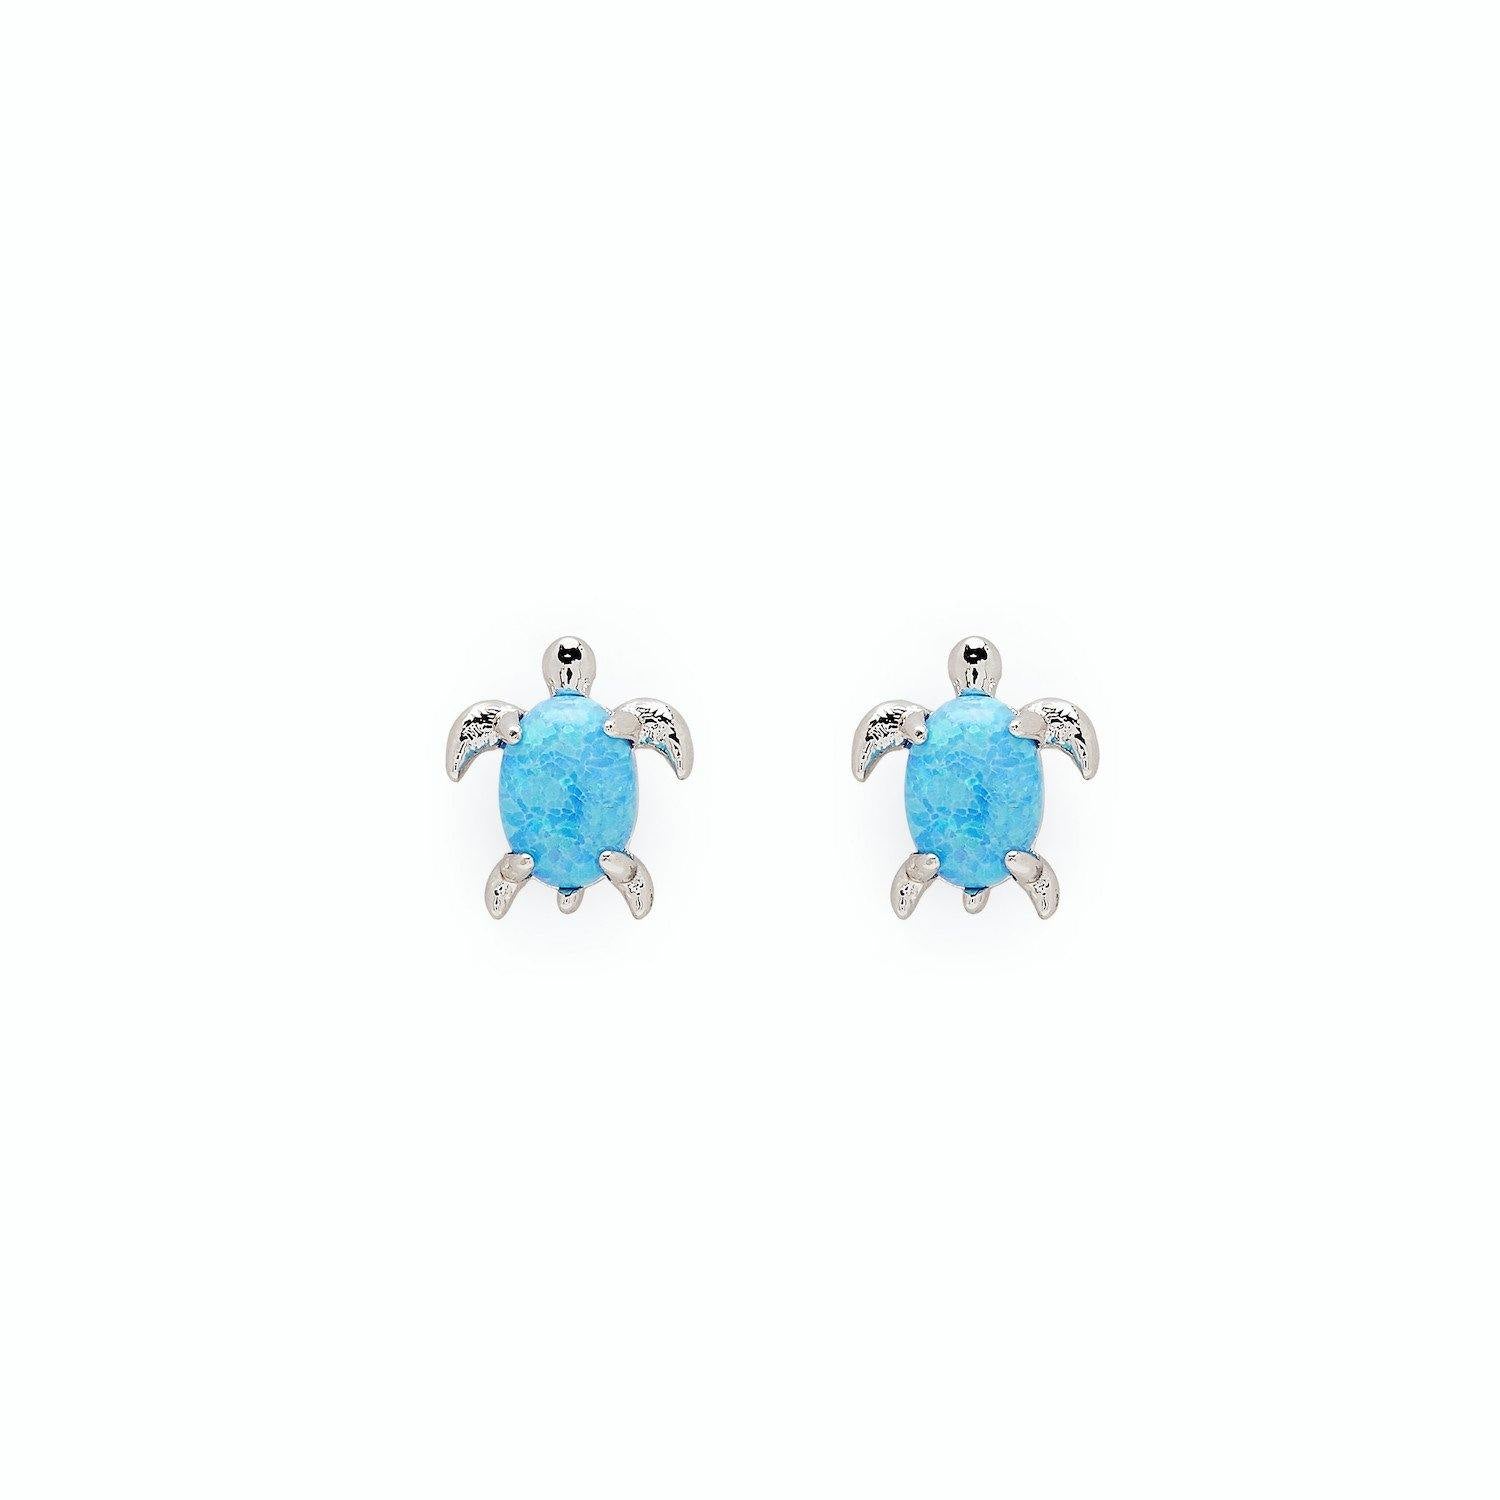 Summer 2021 Earrings - The Salty Mare